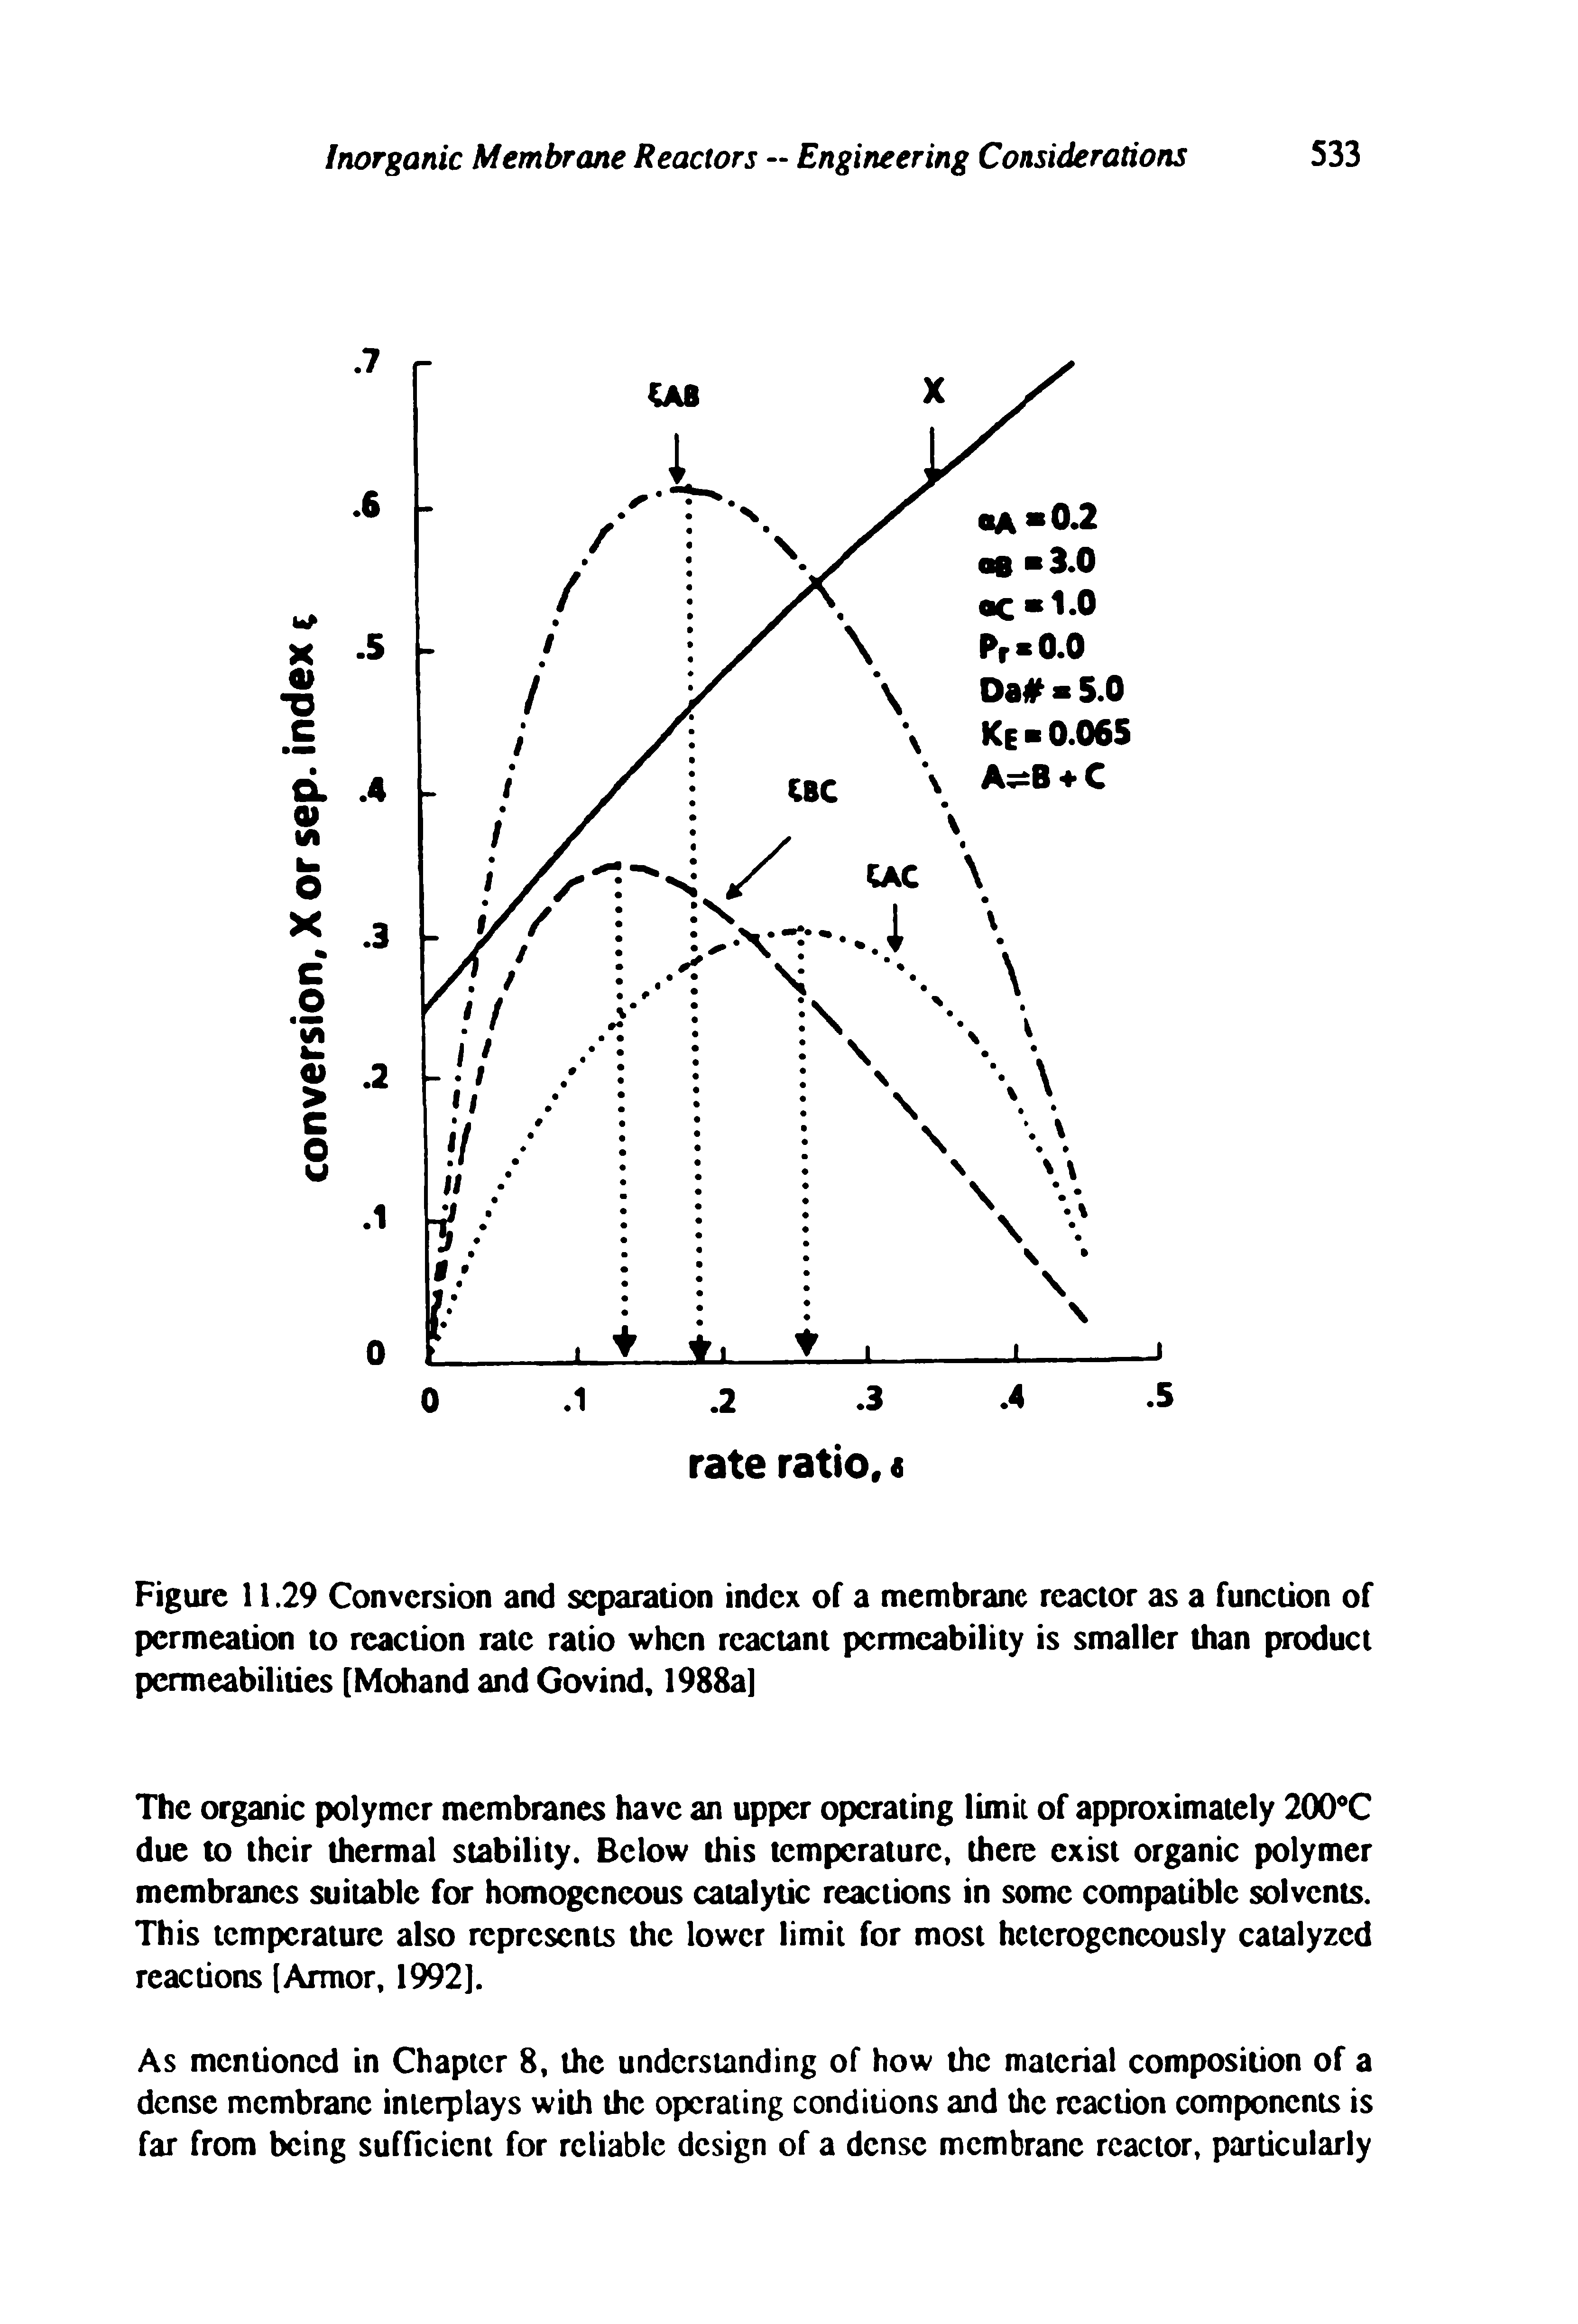 Figure 11.29 Conversion and separation index of a membrane reactor as a function of permeation to reaction rate ratio when reactant permeability is smaller than product permeabilities [Mohand and Govind, 1988a]...